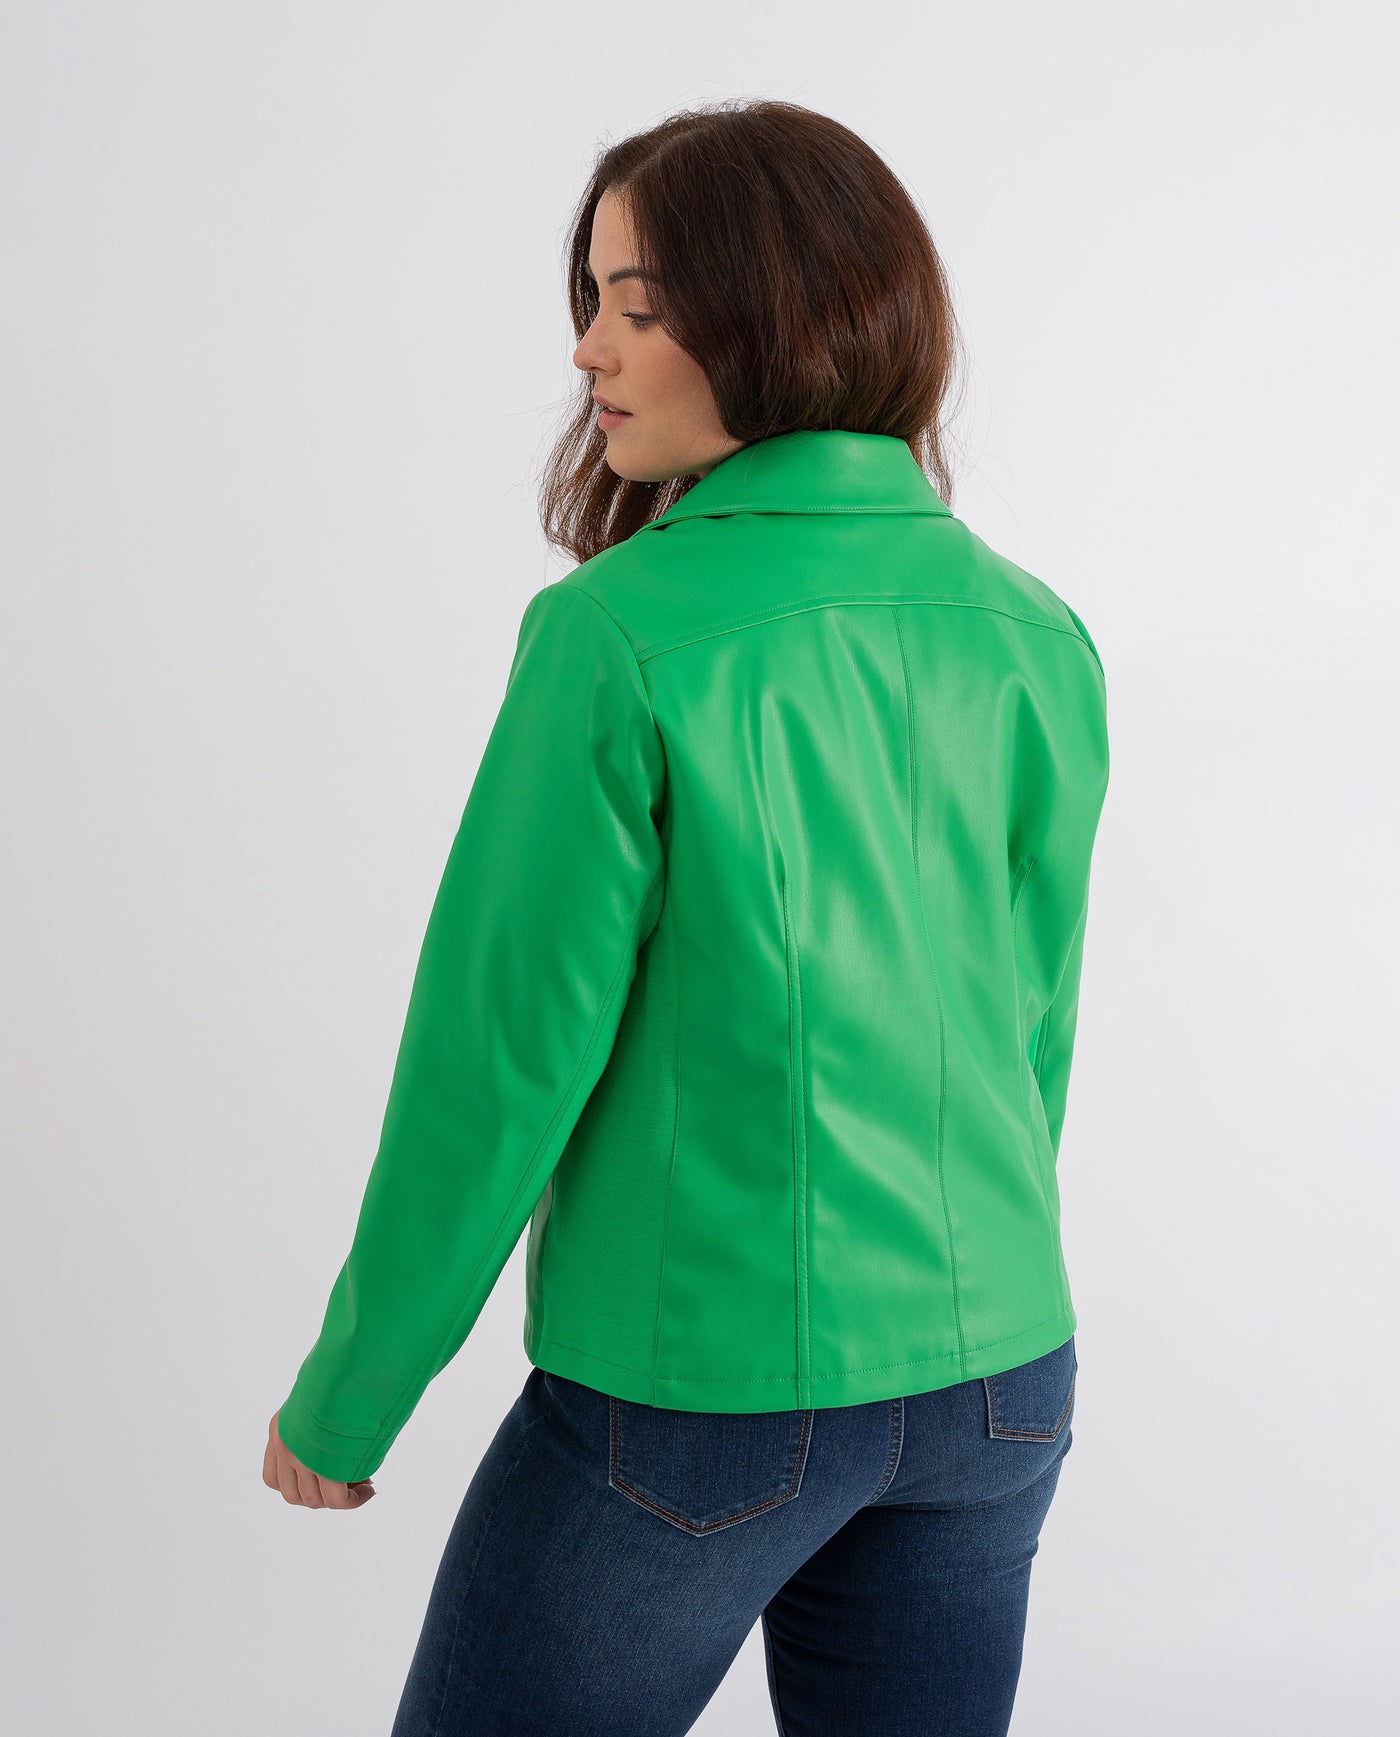 GIACCA IN ECOPELLE VERDE CON REVERS